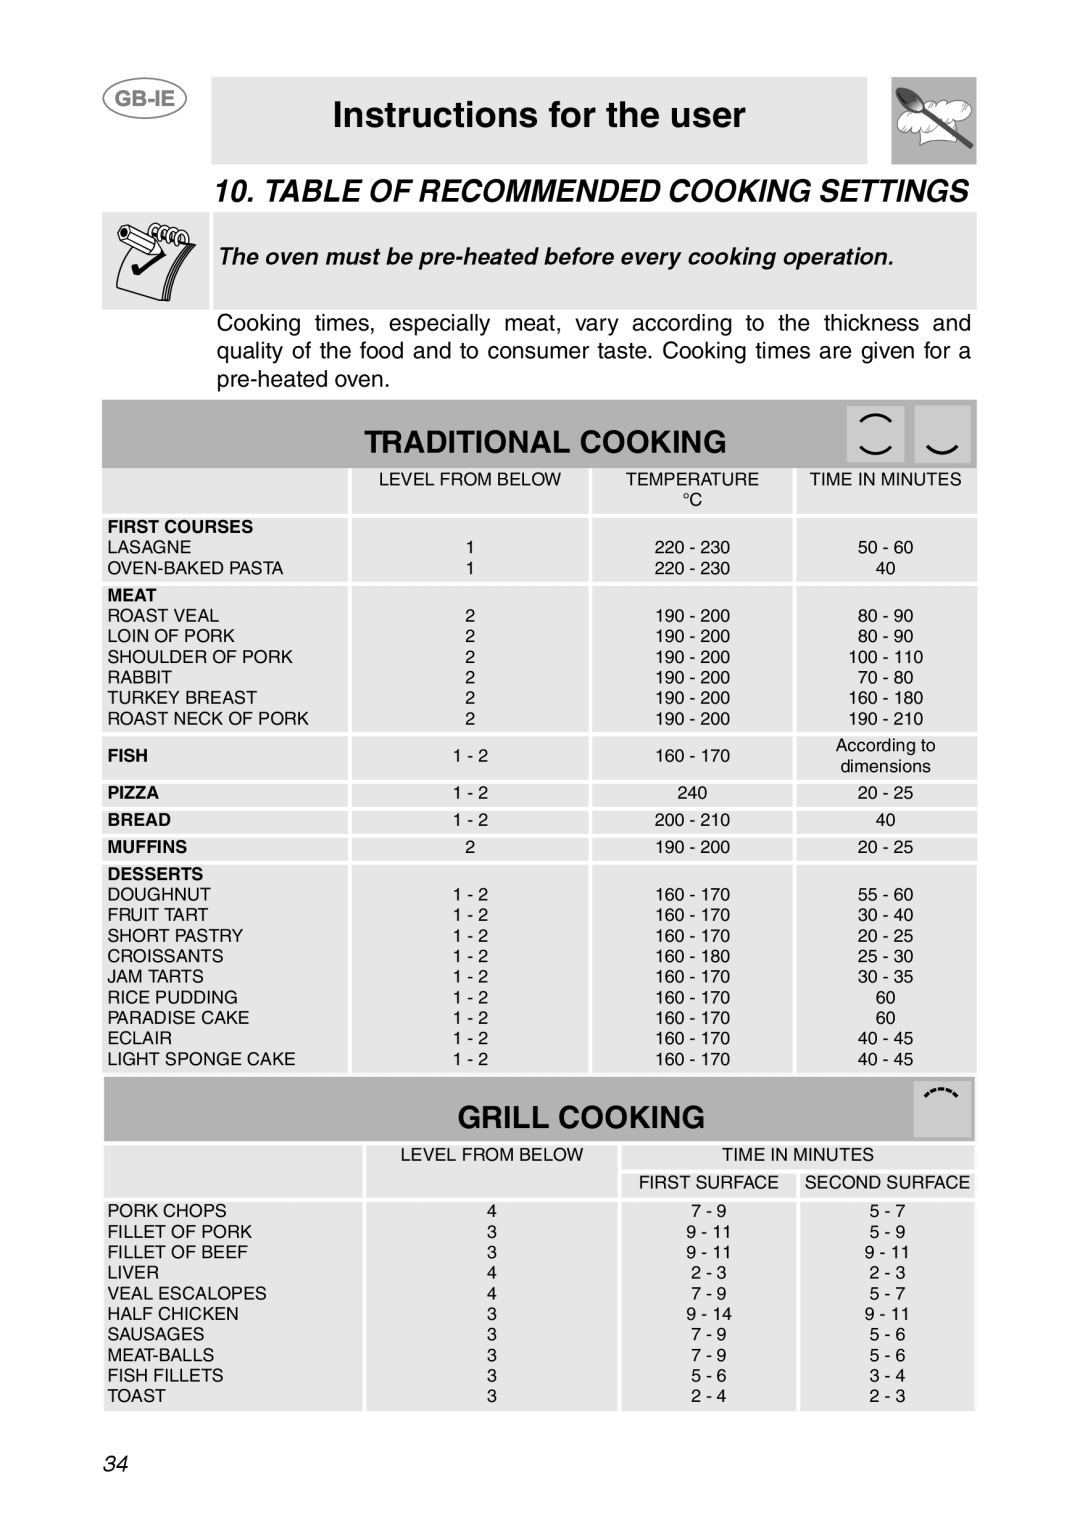 Smeg SC321N Table Of Recommended Cooking Settings, Instructions for the user, Traditional Cooking, Grill Cooking, Meat 